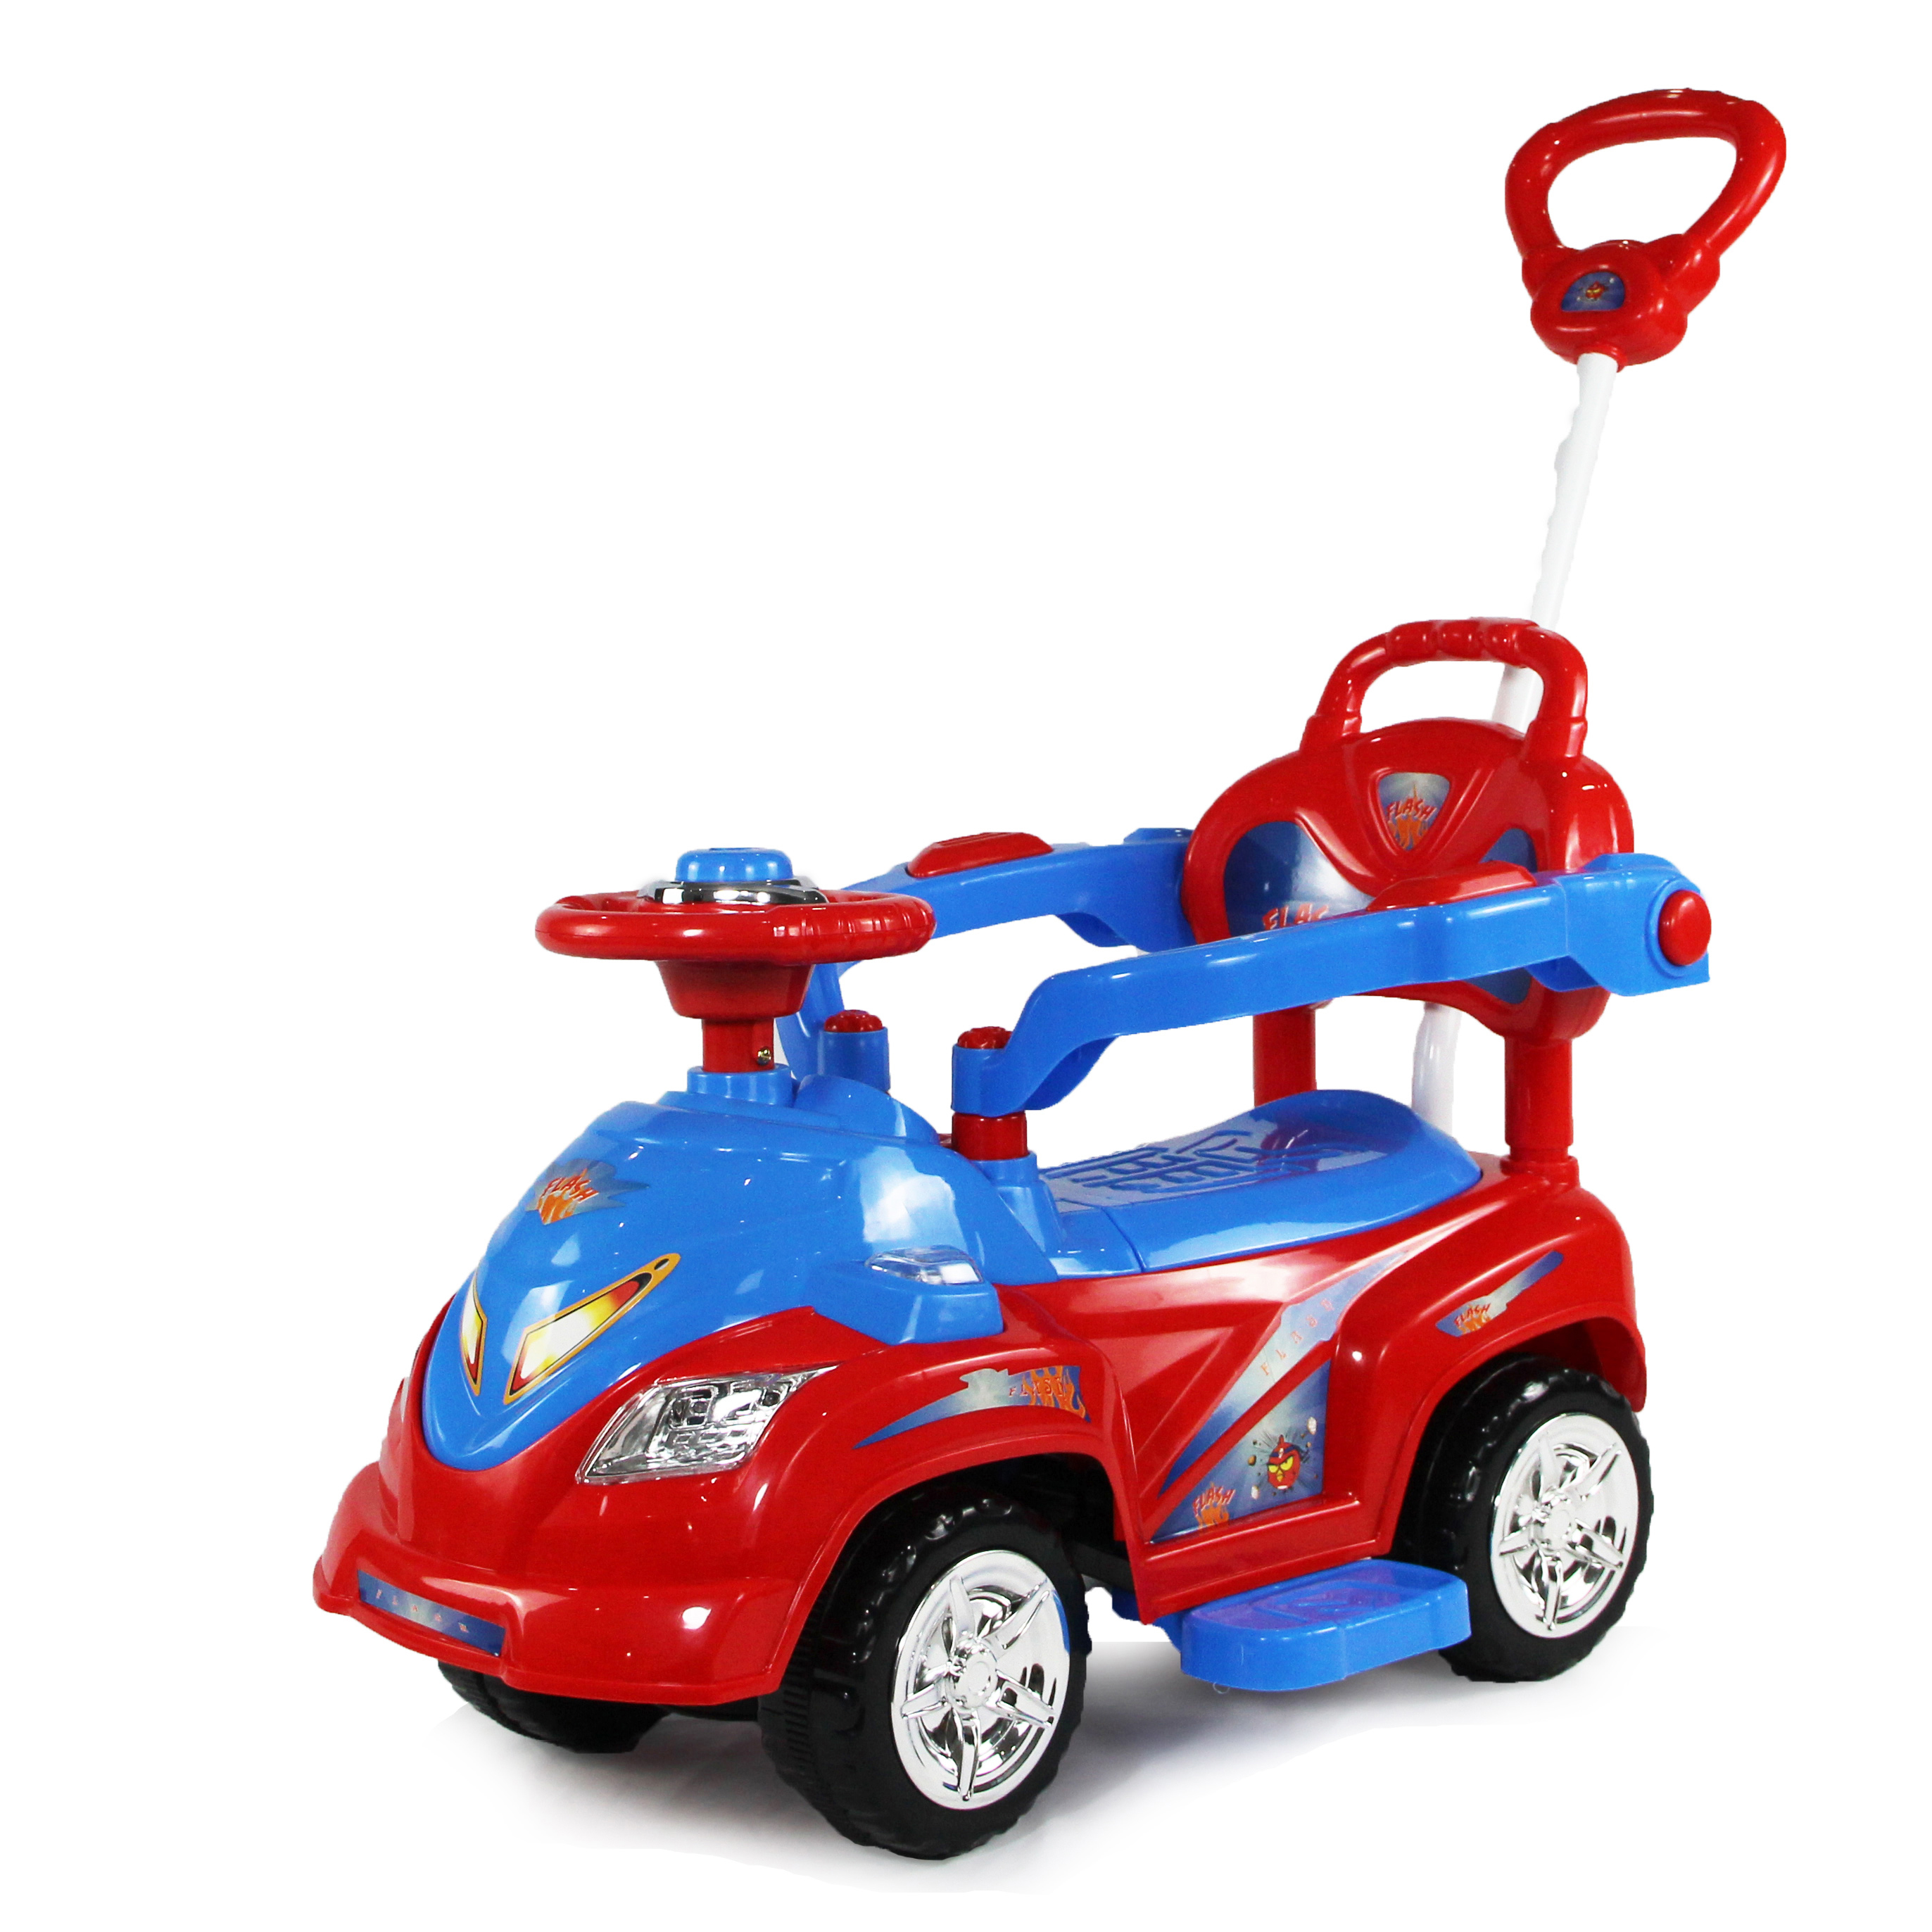 2021 Good Quality Baby Ride On - Gift toy for toddler kids ride on SM168-A1 – Tera